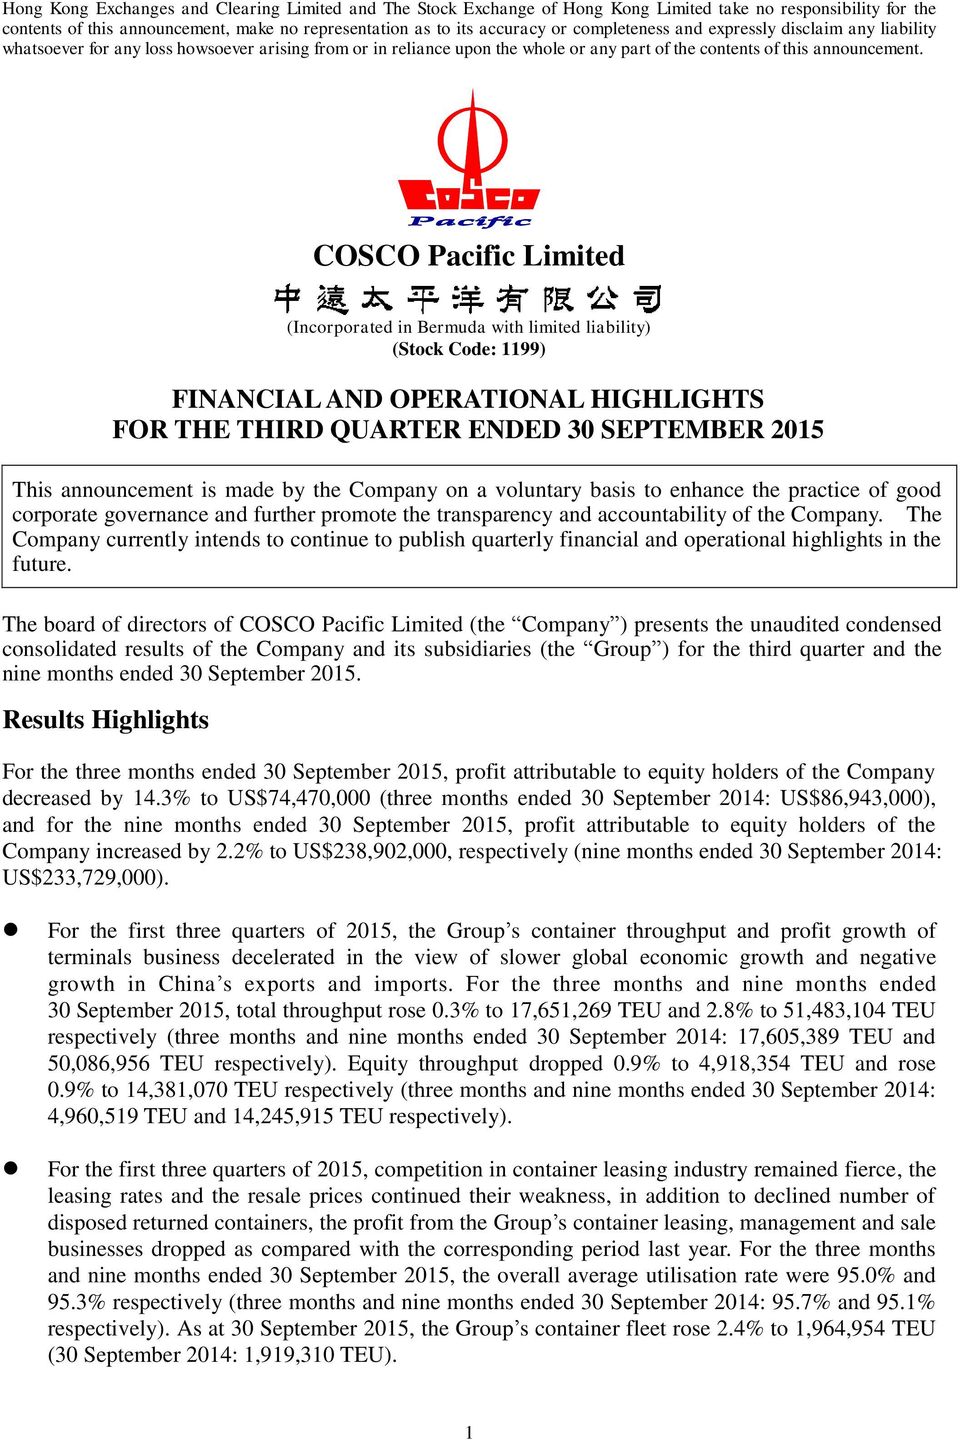 COSCO Pacific Limited (Incorporated in Bermuda with limited liability) (Stock Code: 1199) FINANCIAL AND OPERATIONAL HIGHLIGHTS FOR THE THIRD QUARTER ENDED 30 SEPTEMBER 2015 This announcement is made